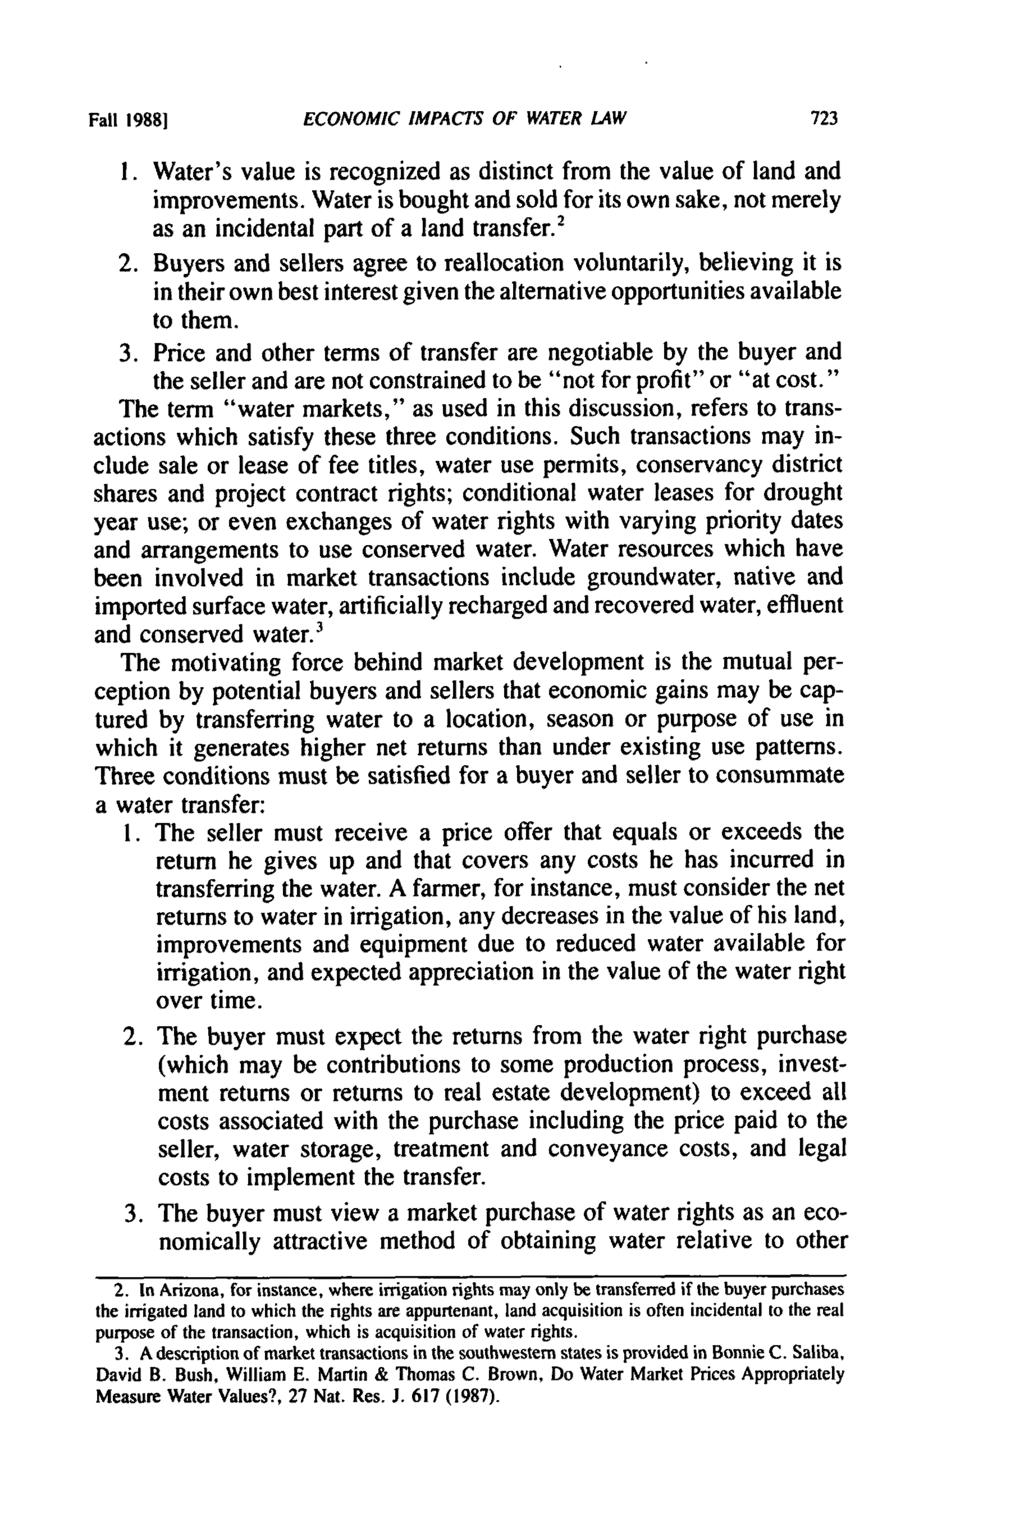 Fall 19881 ECONOMIC IMPACTS OF WATER LAW I. Water's value is recognized as distinct from the value of land and improvements.